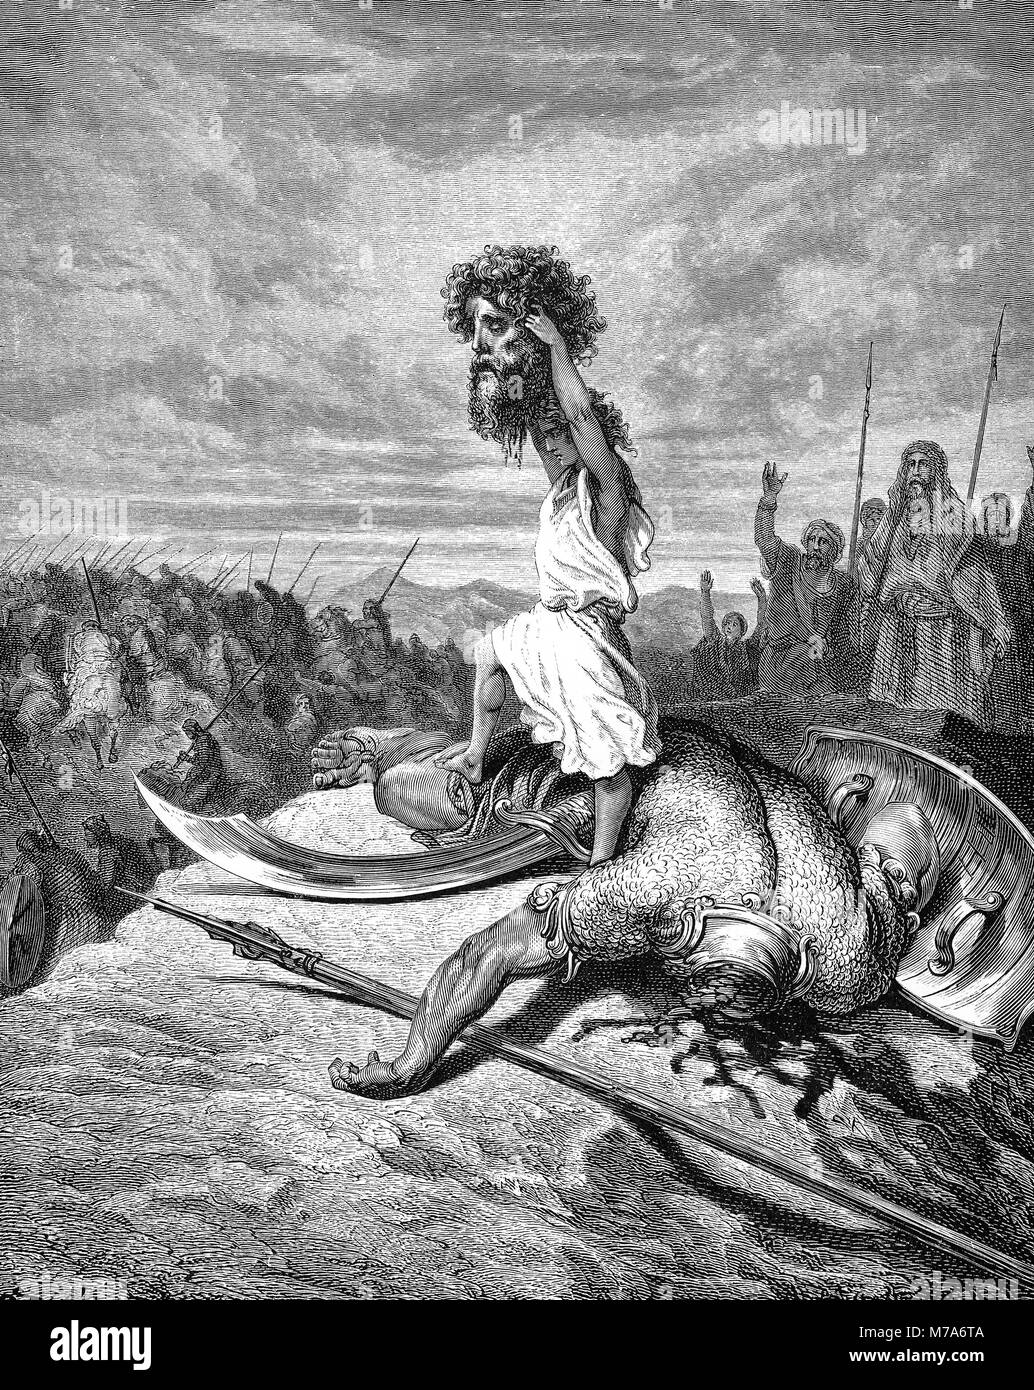 David with the head of Goliath (Book of Samuel). Illustration by Gustave Dore. Stock Photo